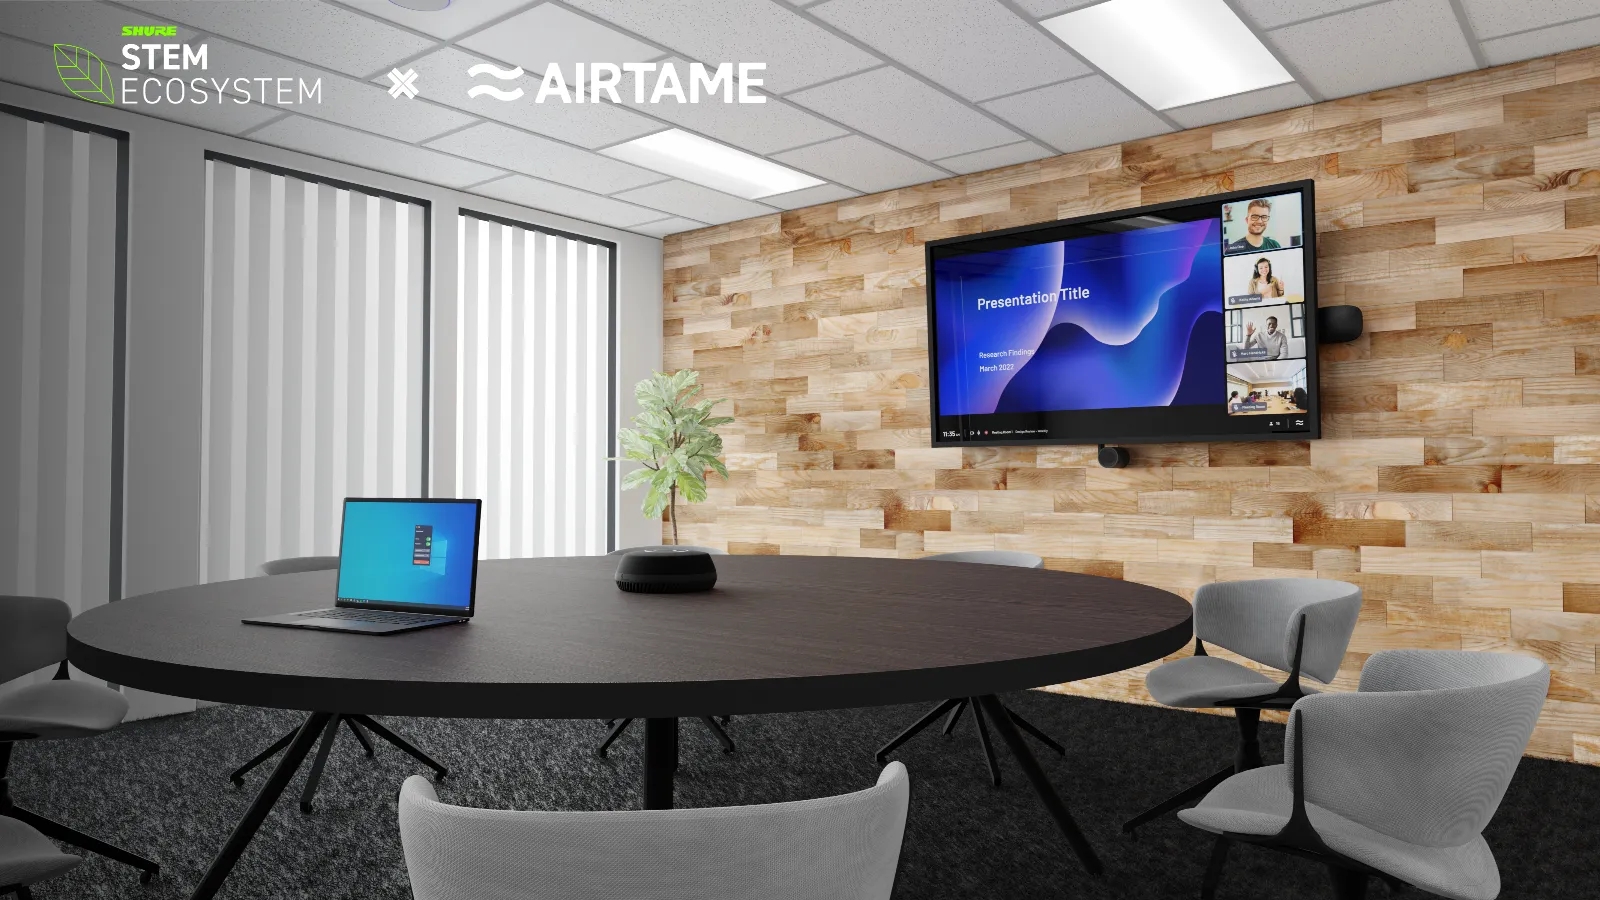 Stem Ecosystem and Airtame Hub in meeting room